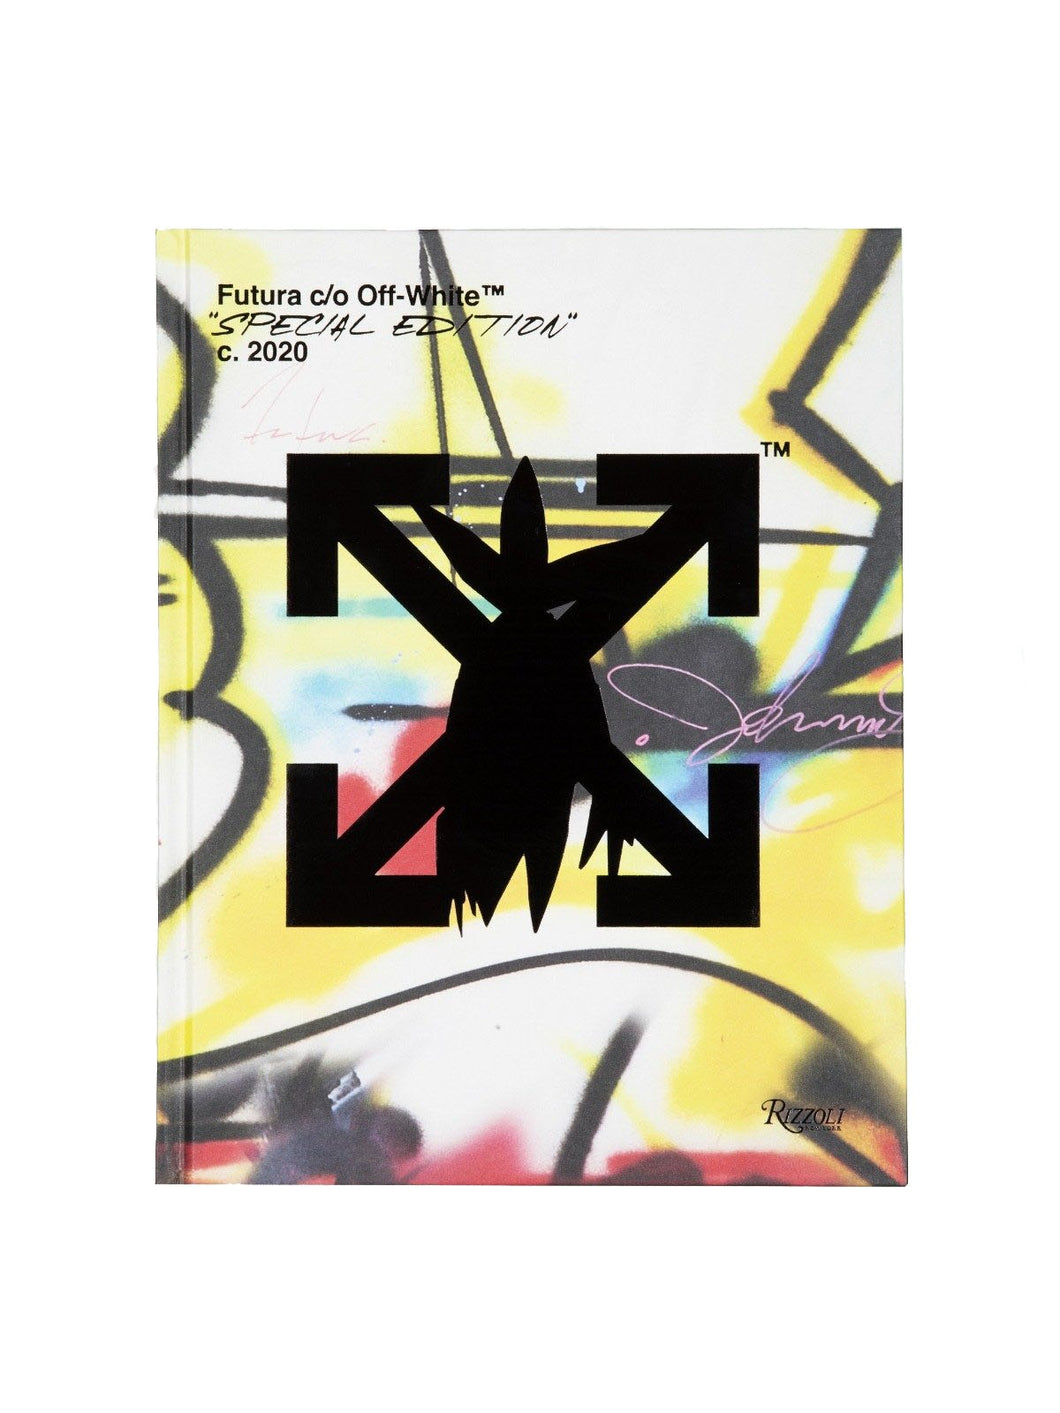 FUTURA2000 x Virgil Abloh: Communicating Layers of Culture for a